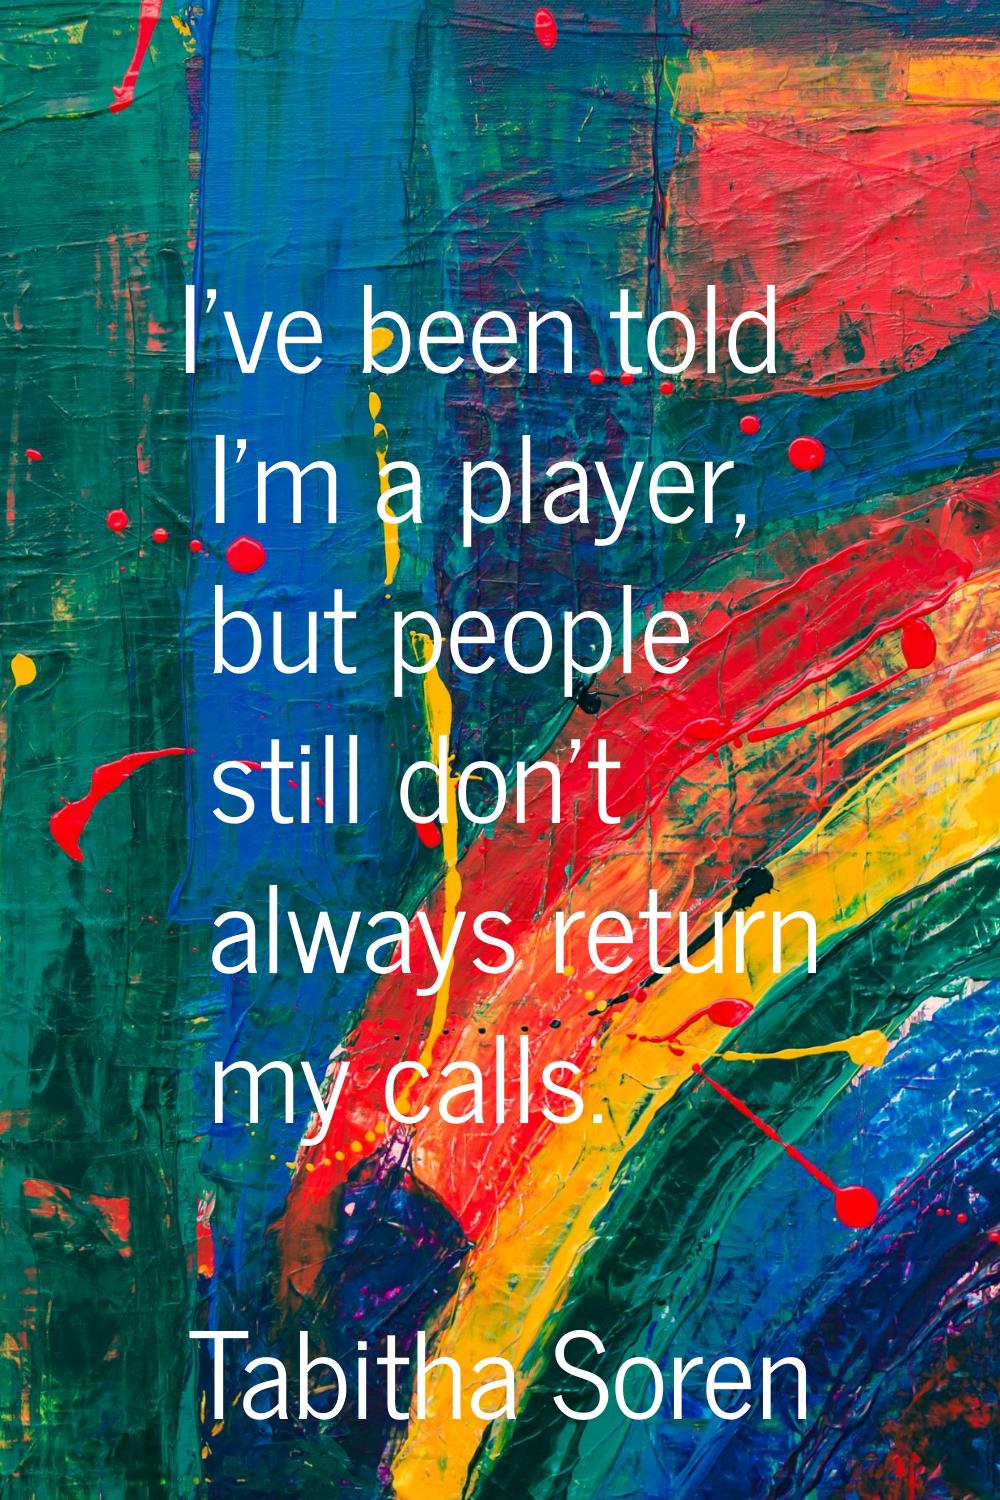 I've been told I'm a player, but people still don't always return my calls.